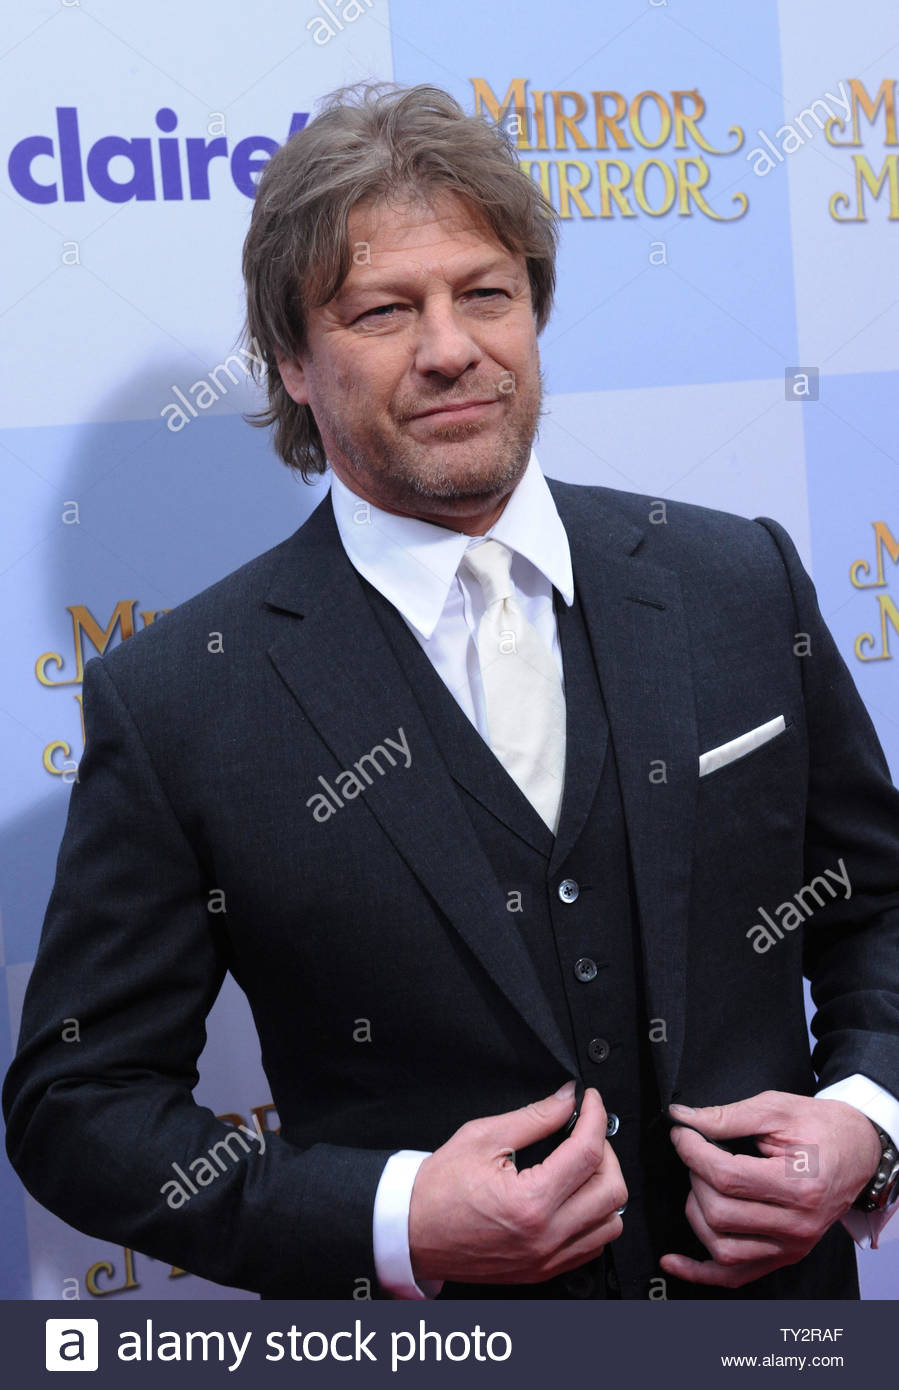 actor-sean-bean-a-cast-member-in-the-motion-picture-comedy-fantasy-mirror-mirror-attends-the-premiere-of-the-film-at-graumans-chinese-theatre-in-the-hollywood-section-of-los-angeles-on-march-17-2012-upijim-ruymen-TY2RAF.jpg